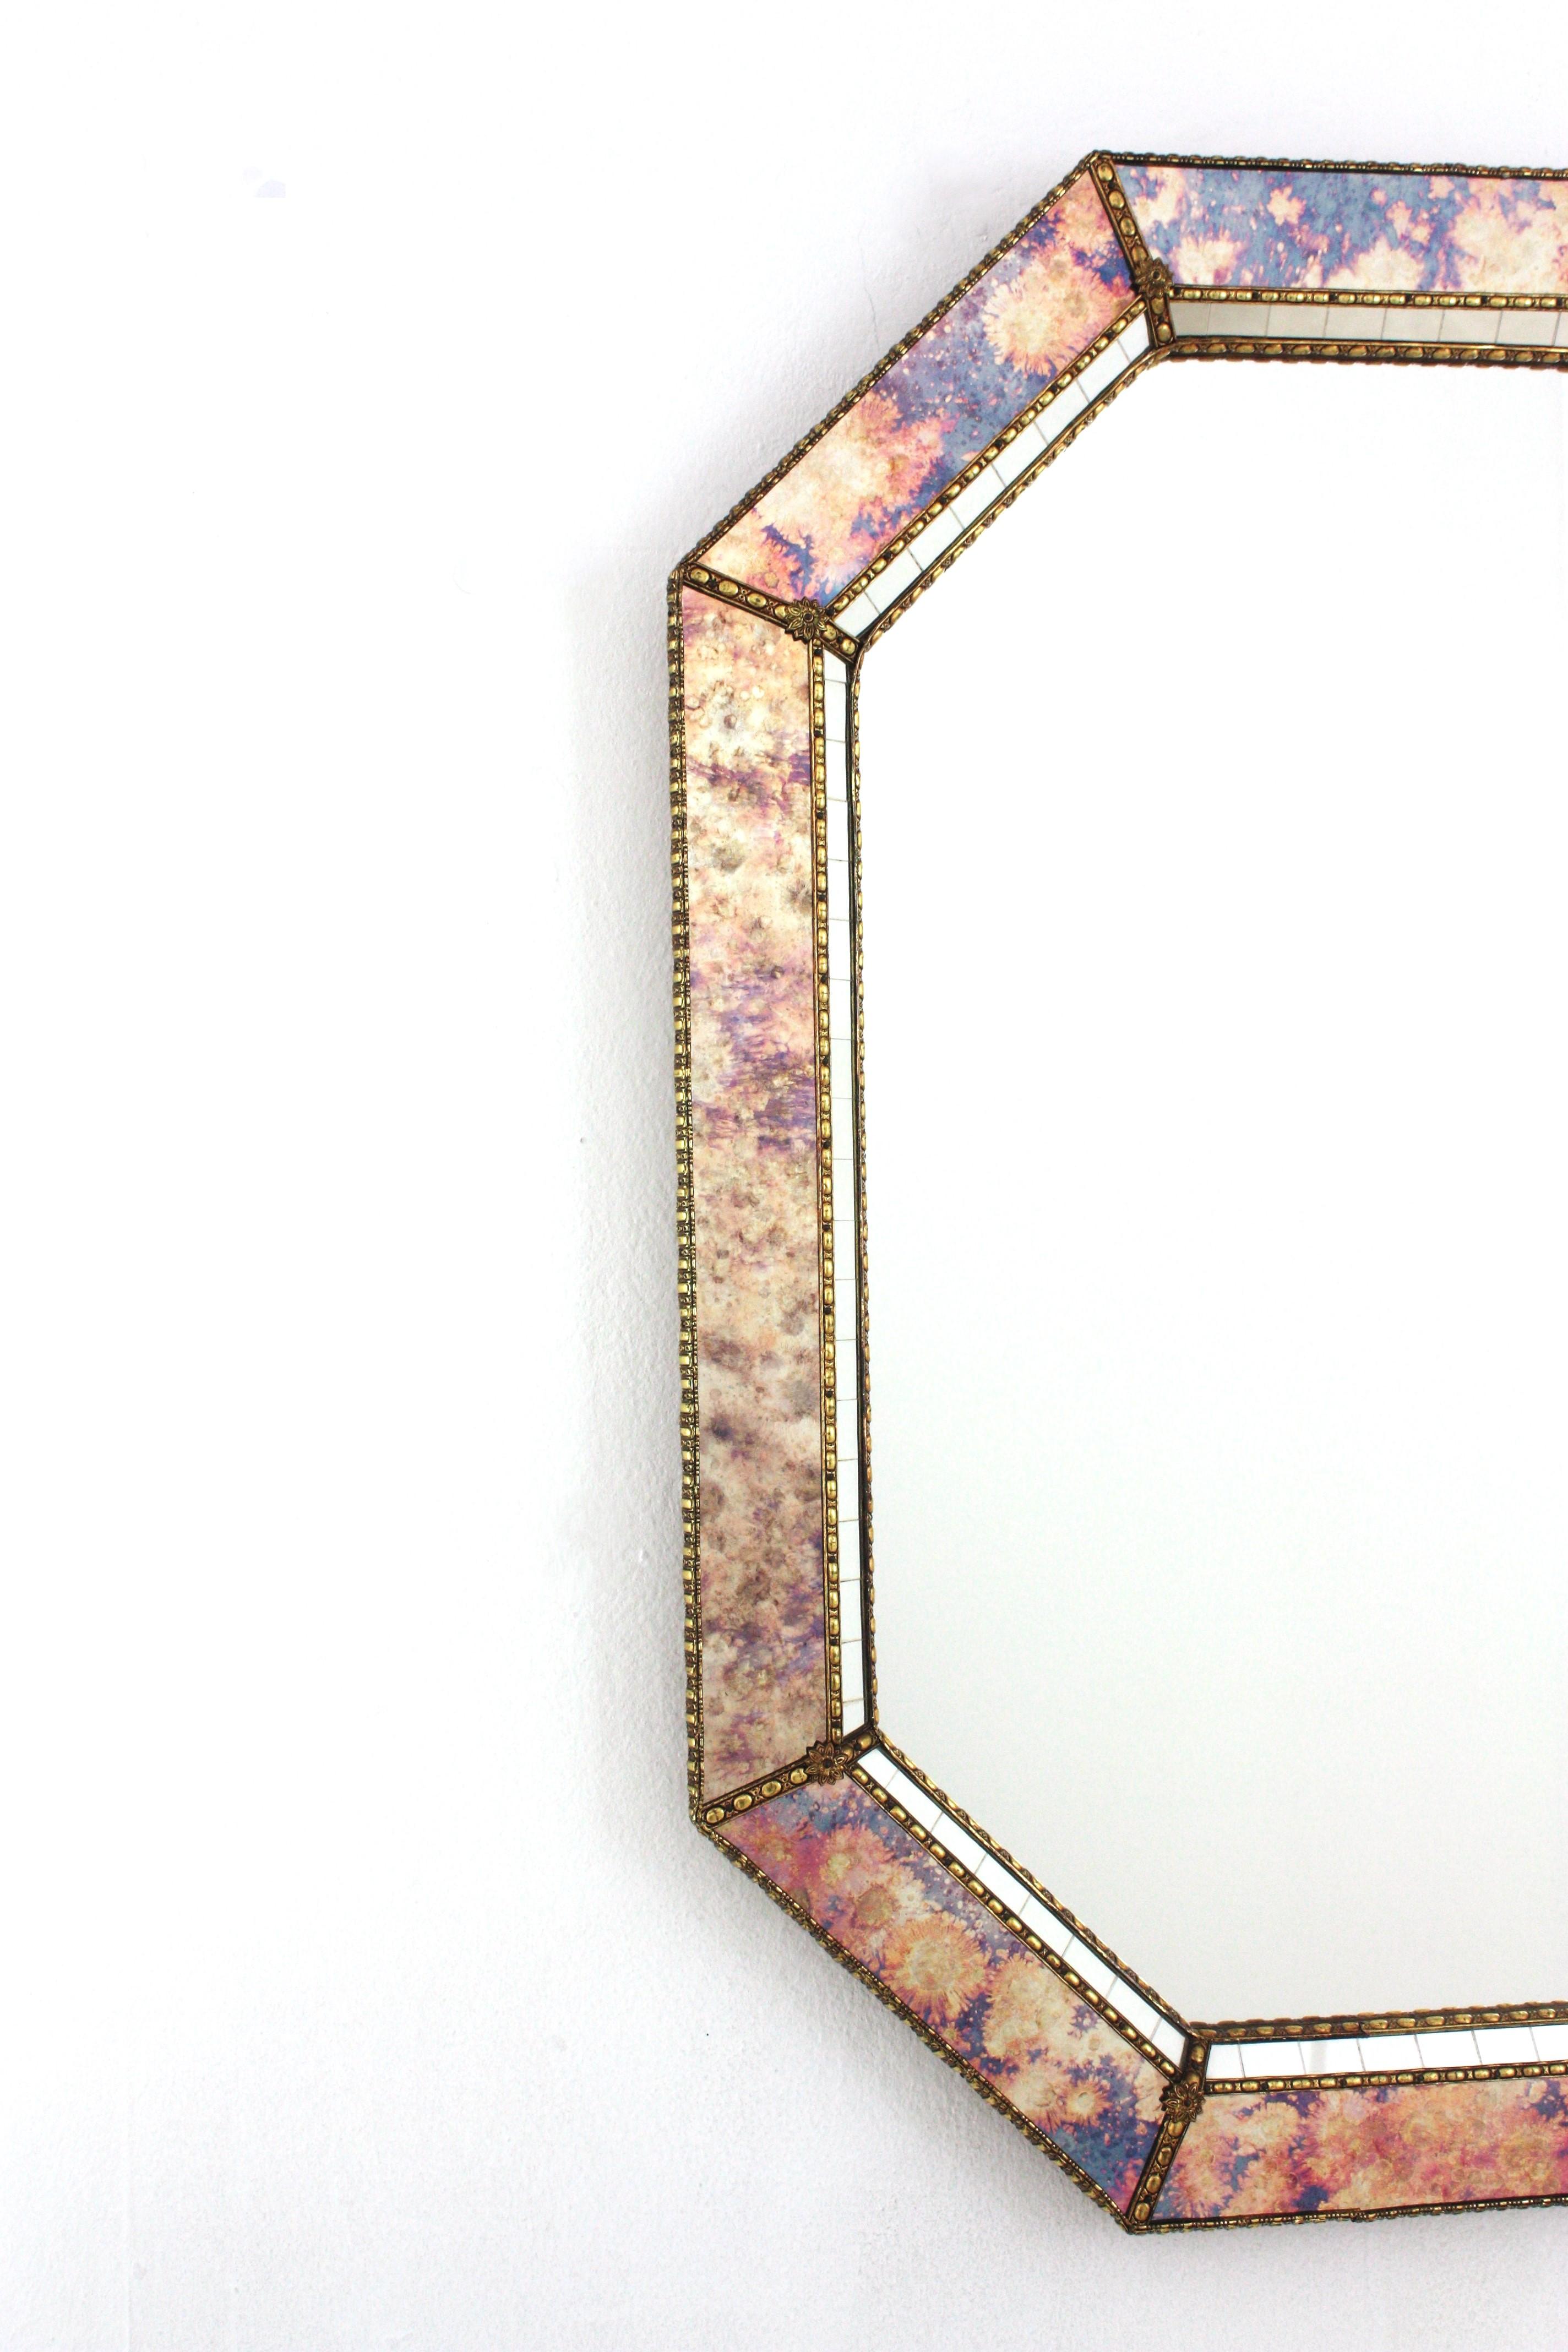 Octagonal Venetian Style Mirrors with Pink Purple Glass & Brass Details, Pair For Sale 4